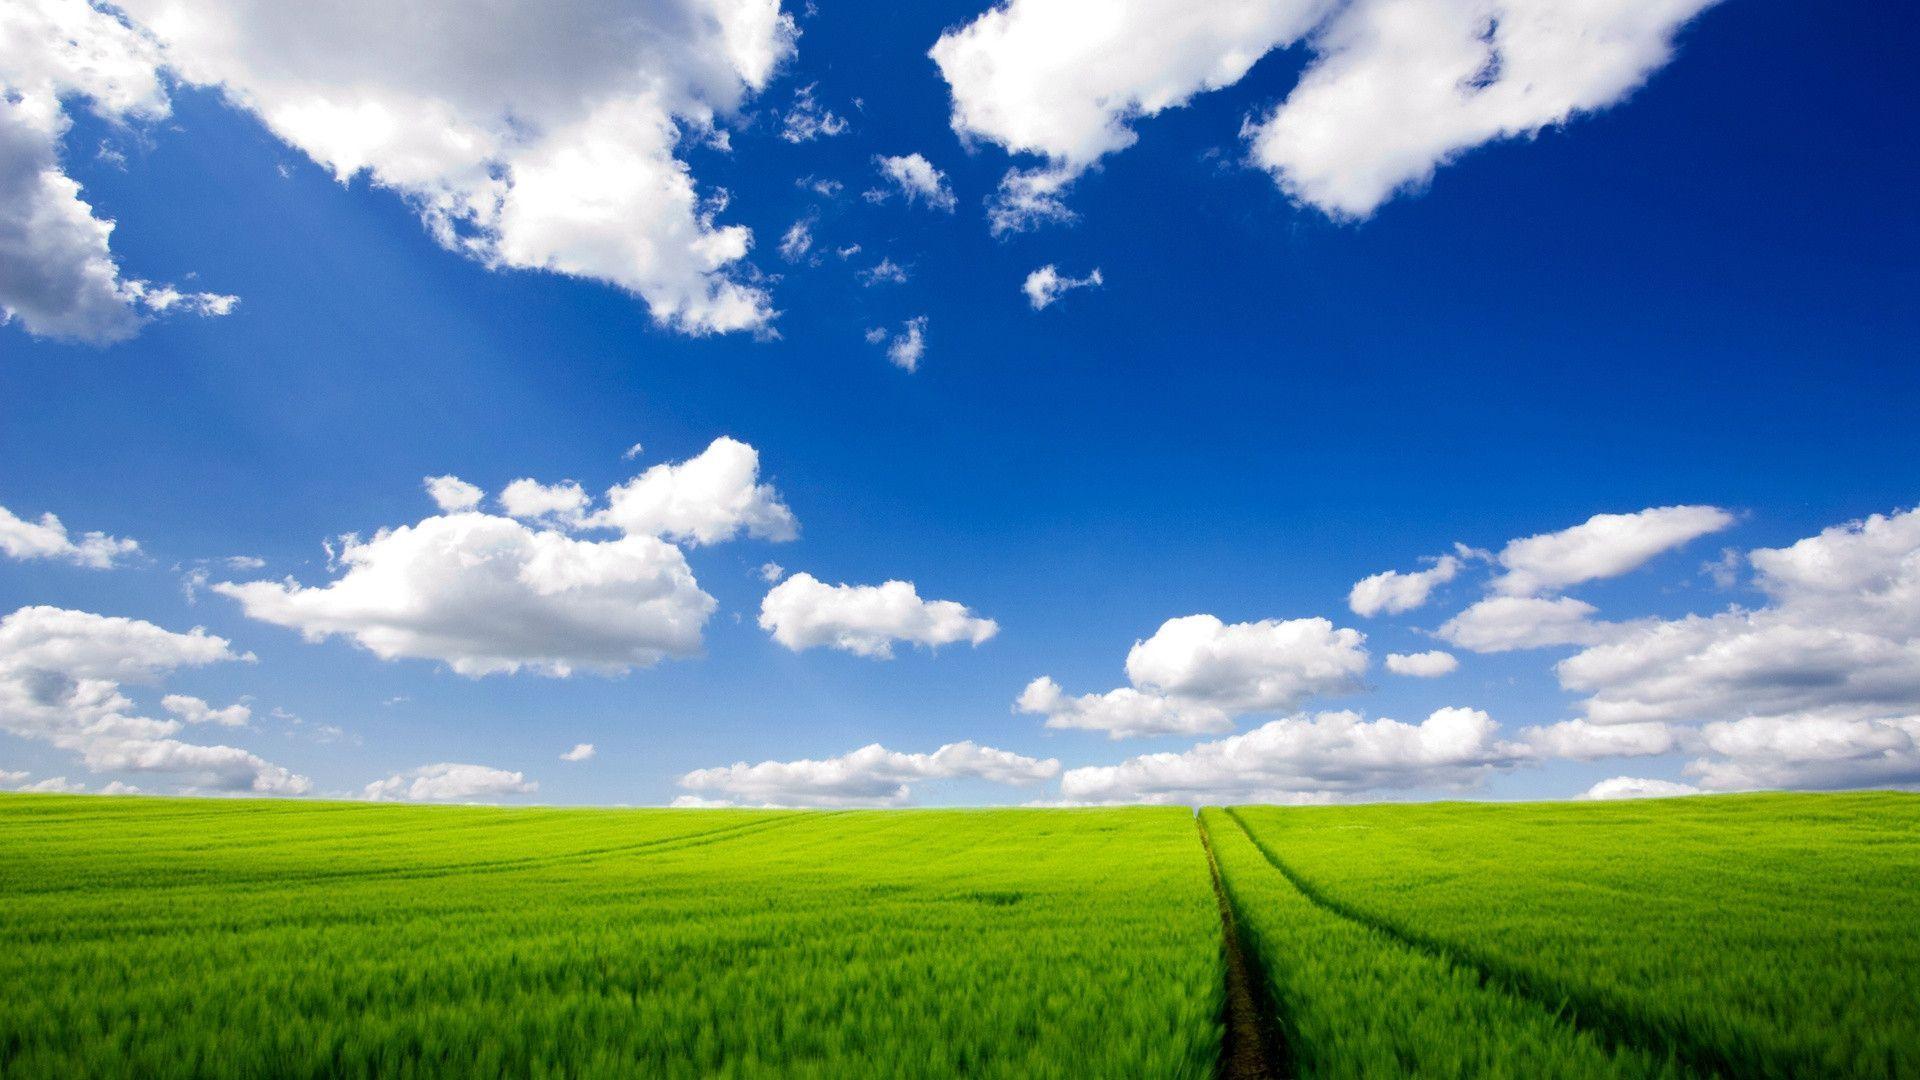 Download 45 Hd Windows Xp Wallpapers For Free - Windows Xp Wallpapers Full Hd - HD Wallpaper 